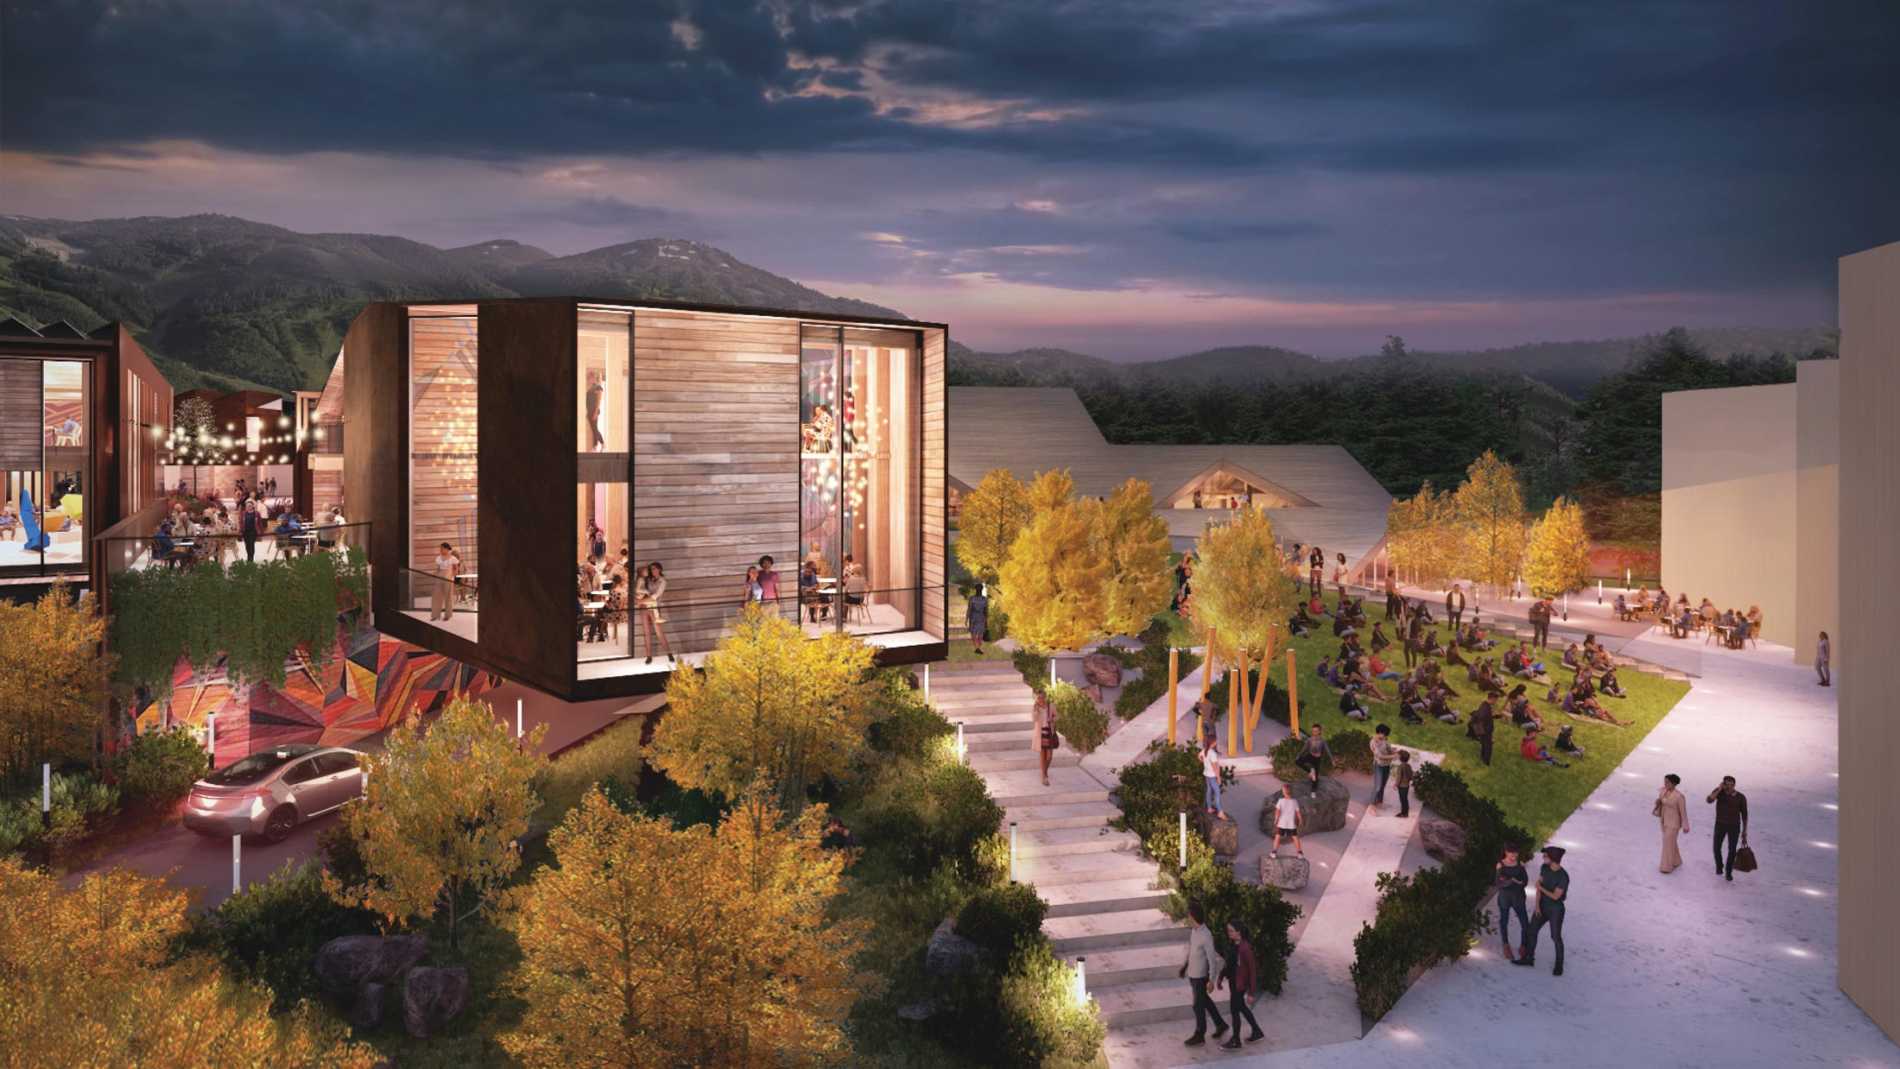 Park City Arts District - Renderings by City